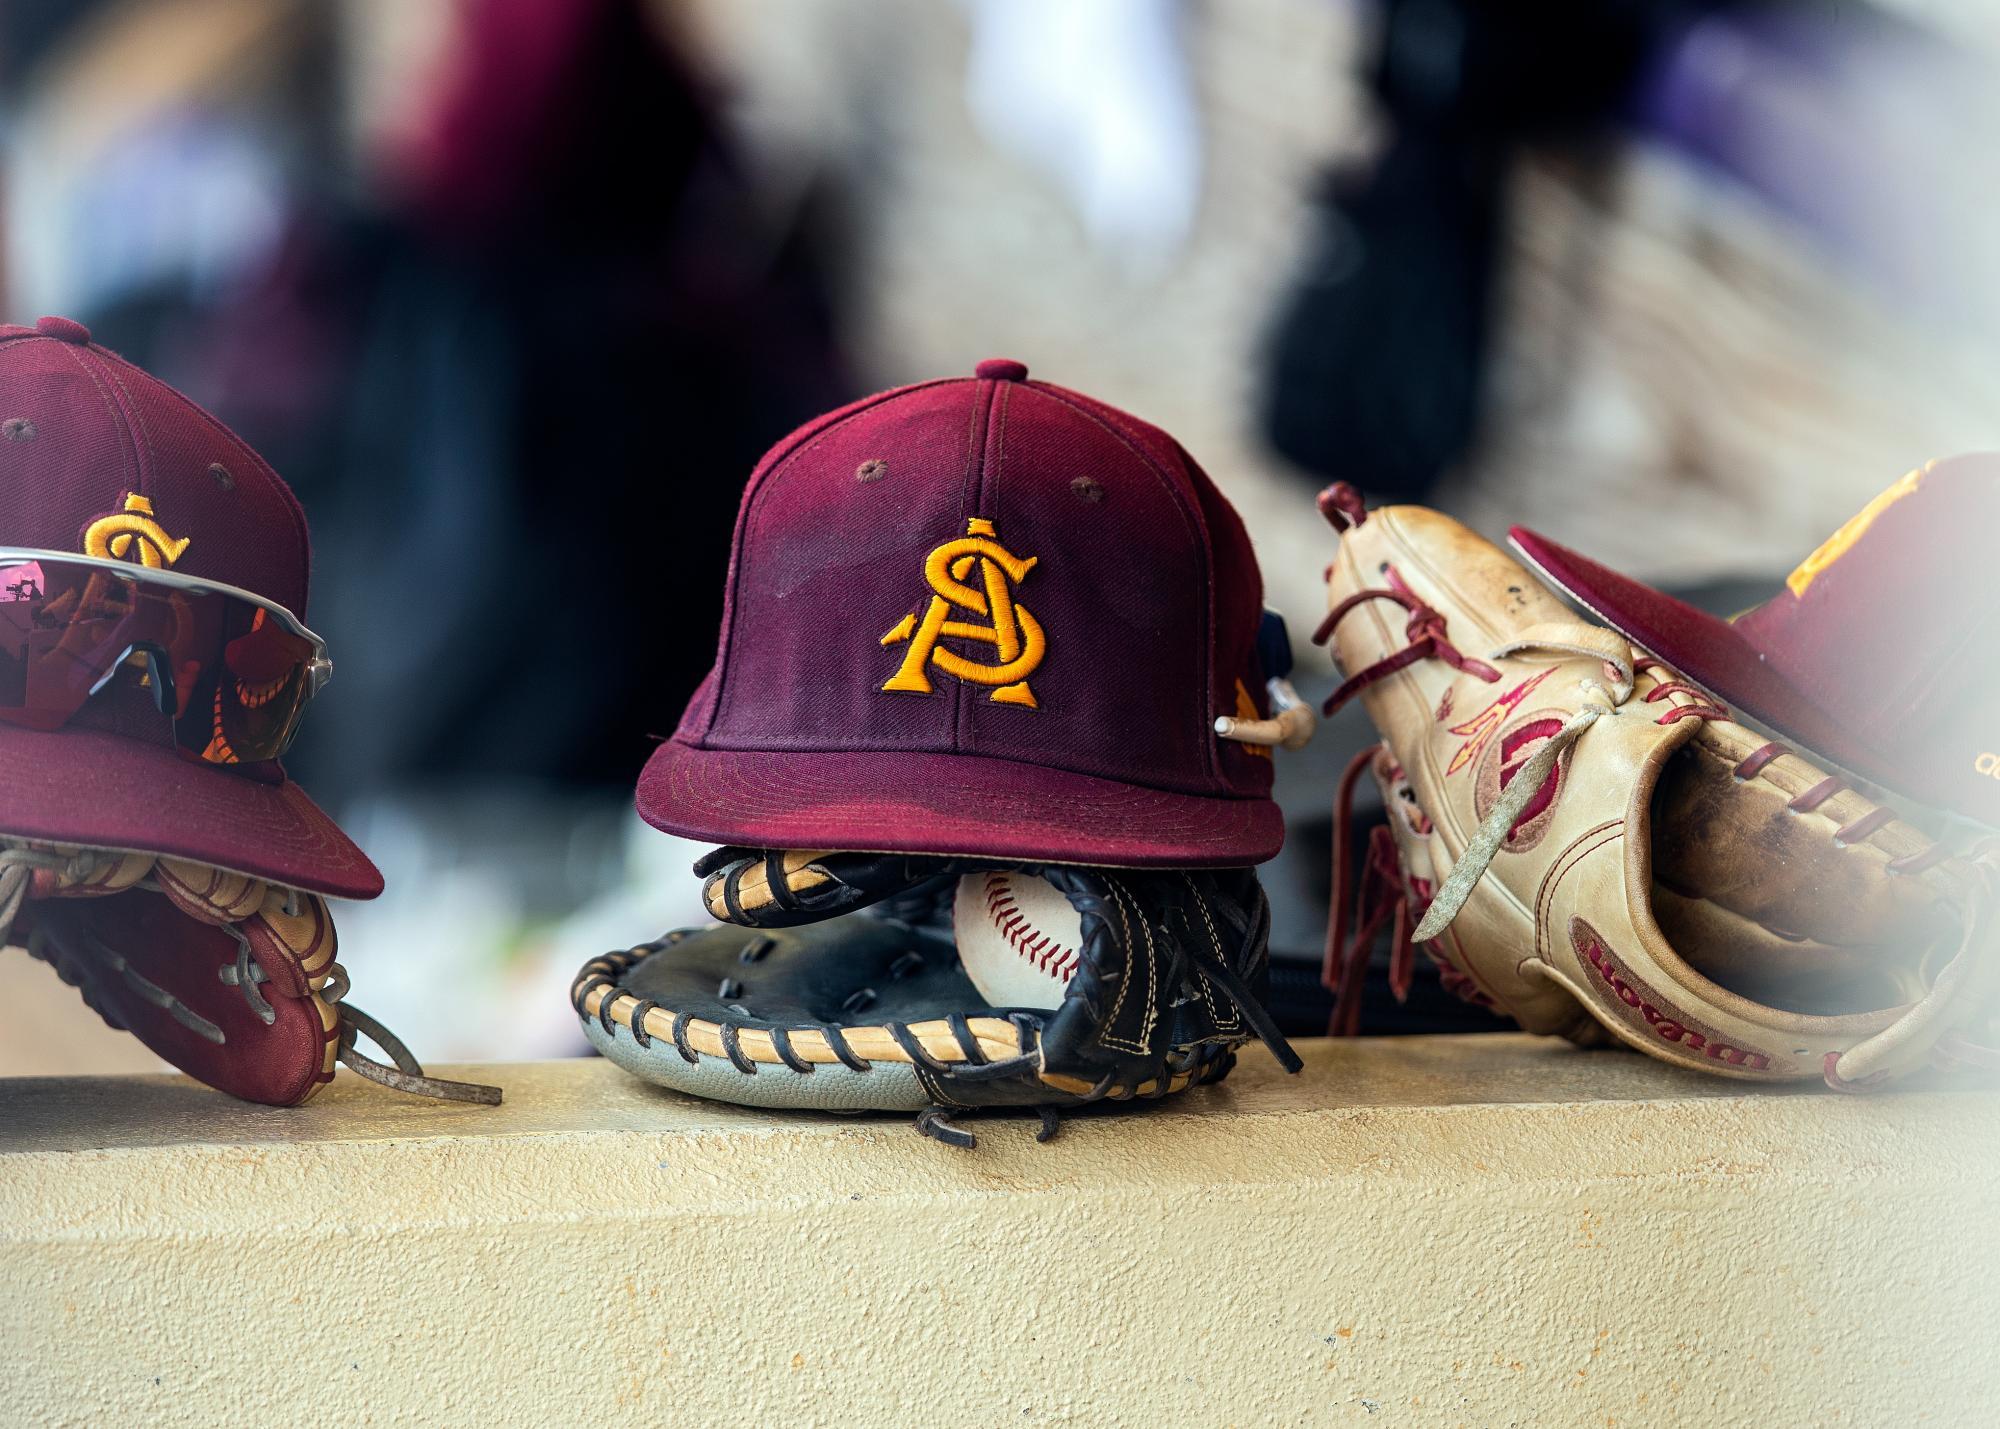  An Arizona State Sun Devils hat rests in the dugout during a game between the Arizona State Sun Devils and the Stony Brook Sea Wolves at Alex Box Stadium in Baton Rouge, Louisiana on June 1, 2019. (Photo by John Korduner/Icon Sportswire via Getty Images)